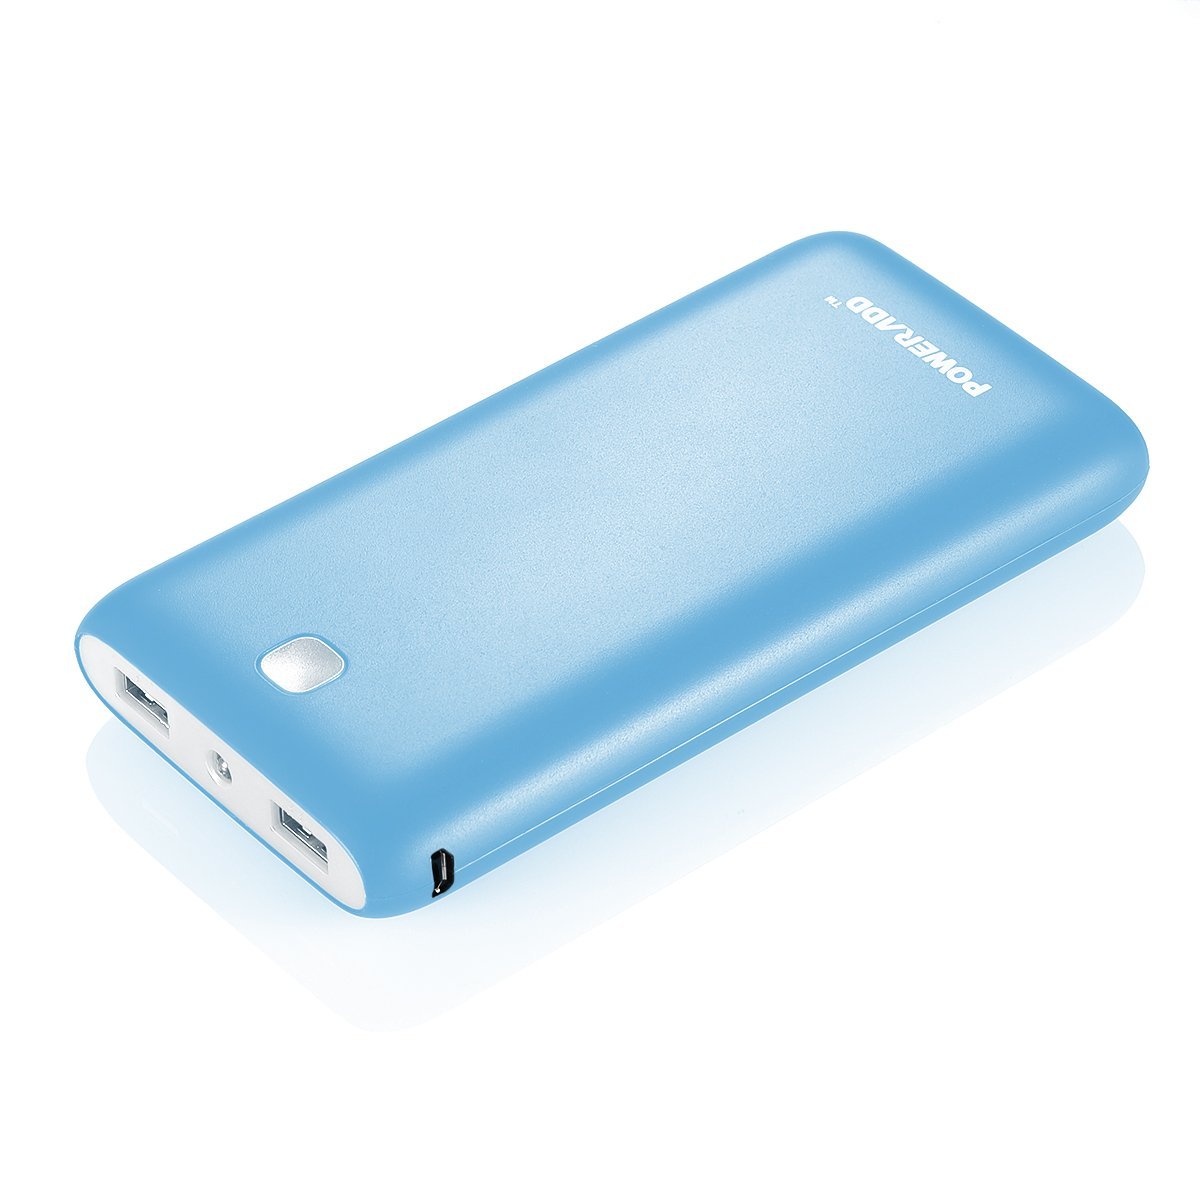 25% Off on Poweradd Powerbanks with Smart Charge Technology – Just $16.49-$17.99!